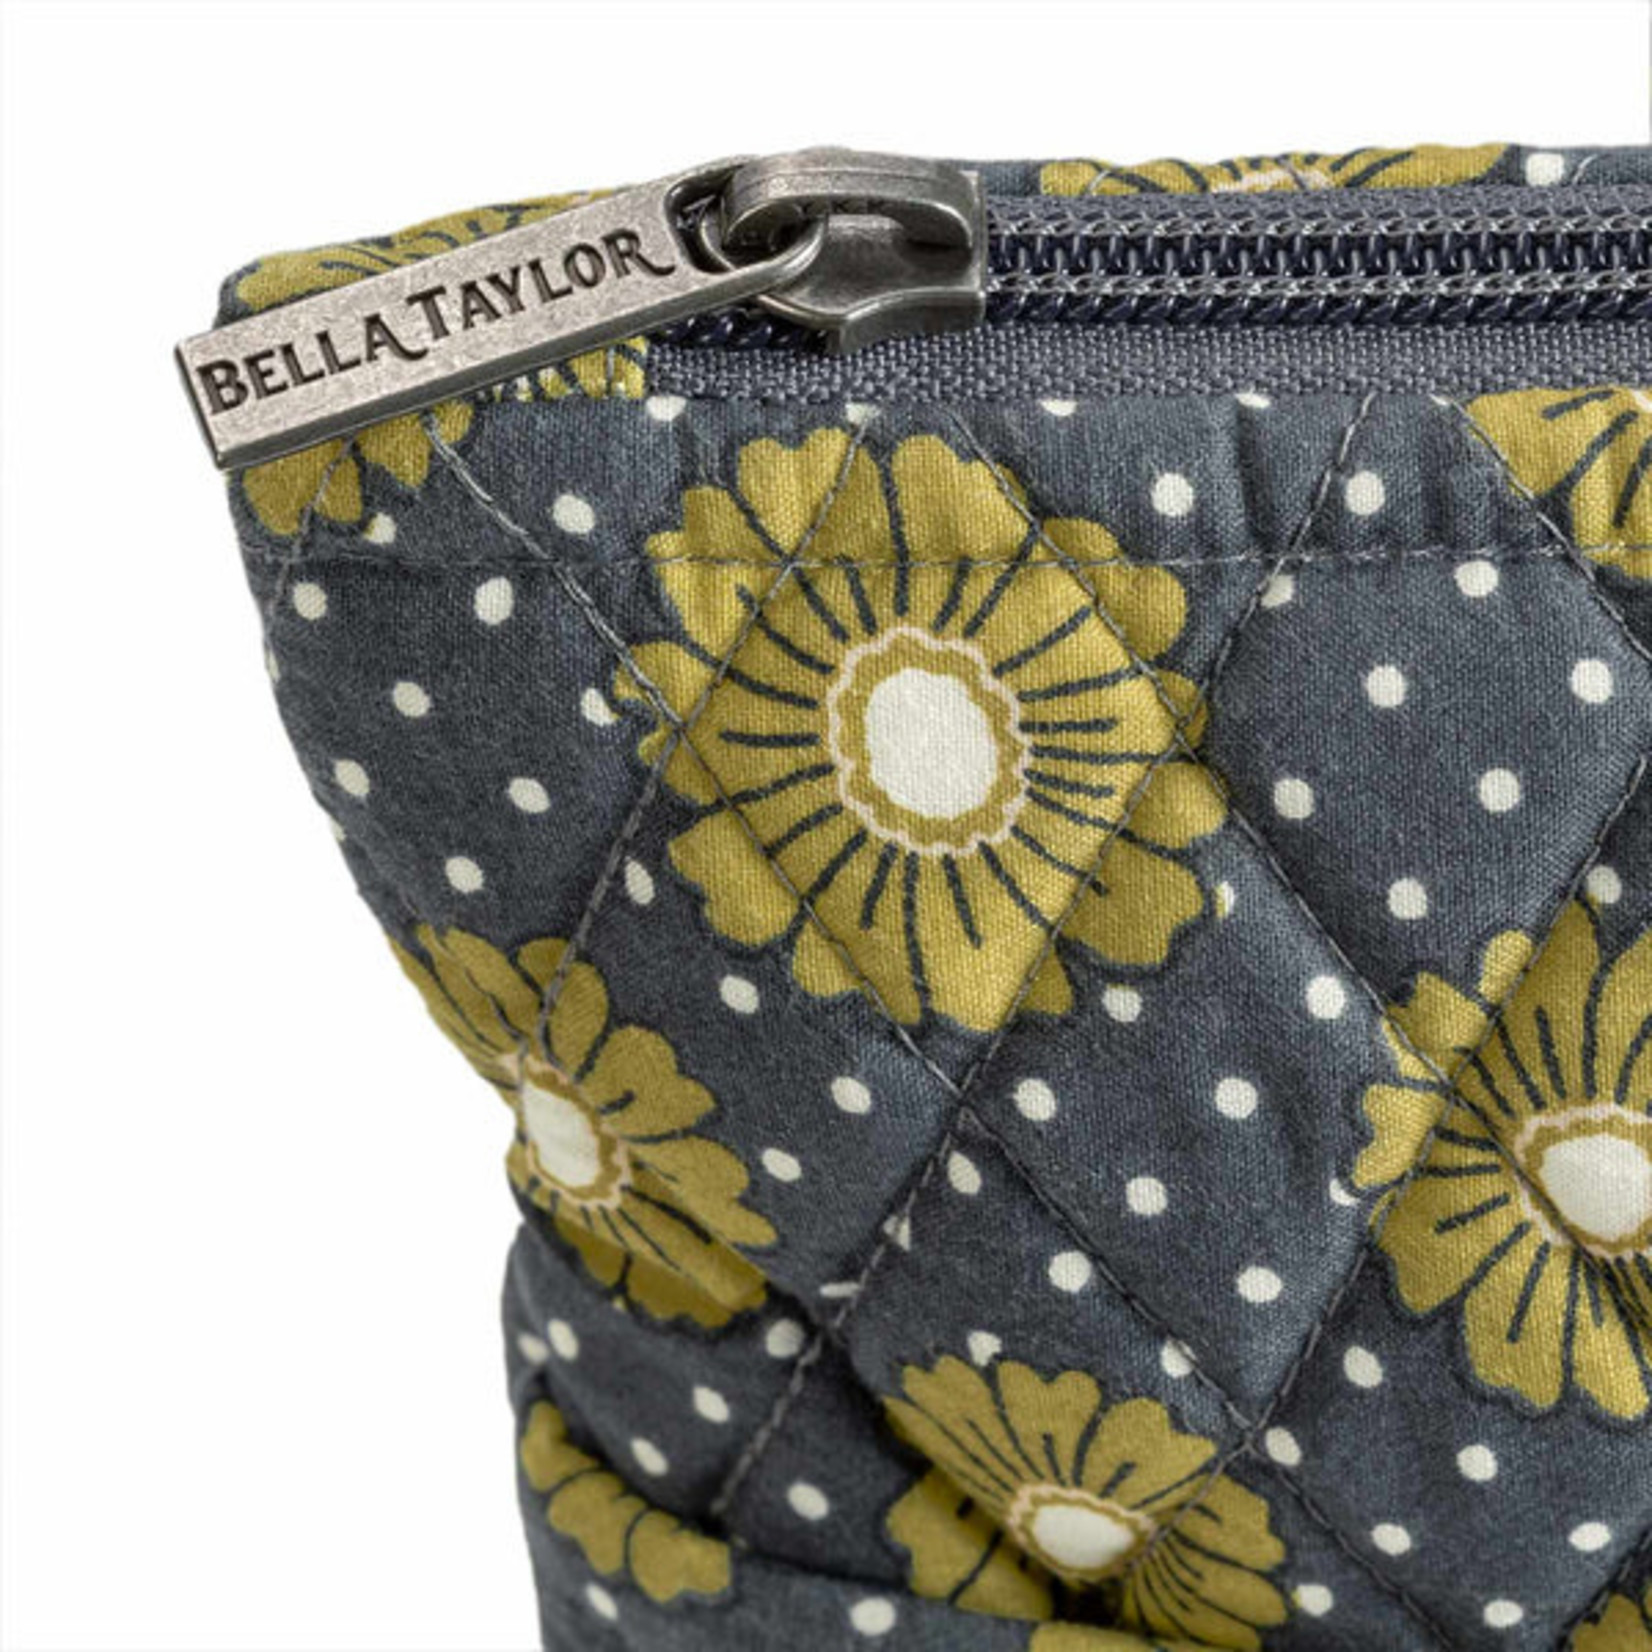 Bella Taylor Dotted Daisy Charcoal - Lunch Tote